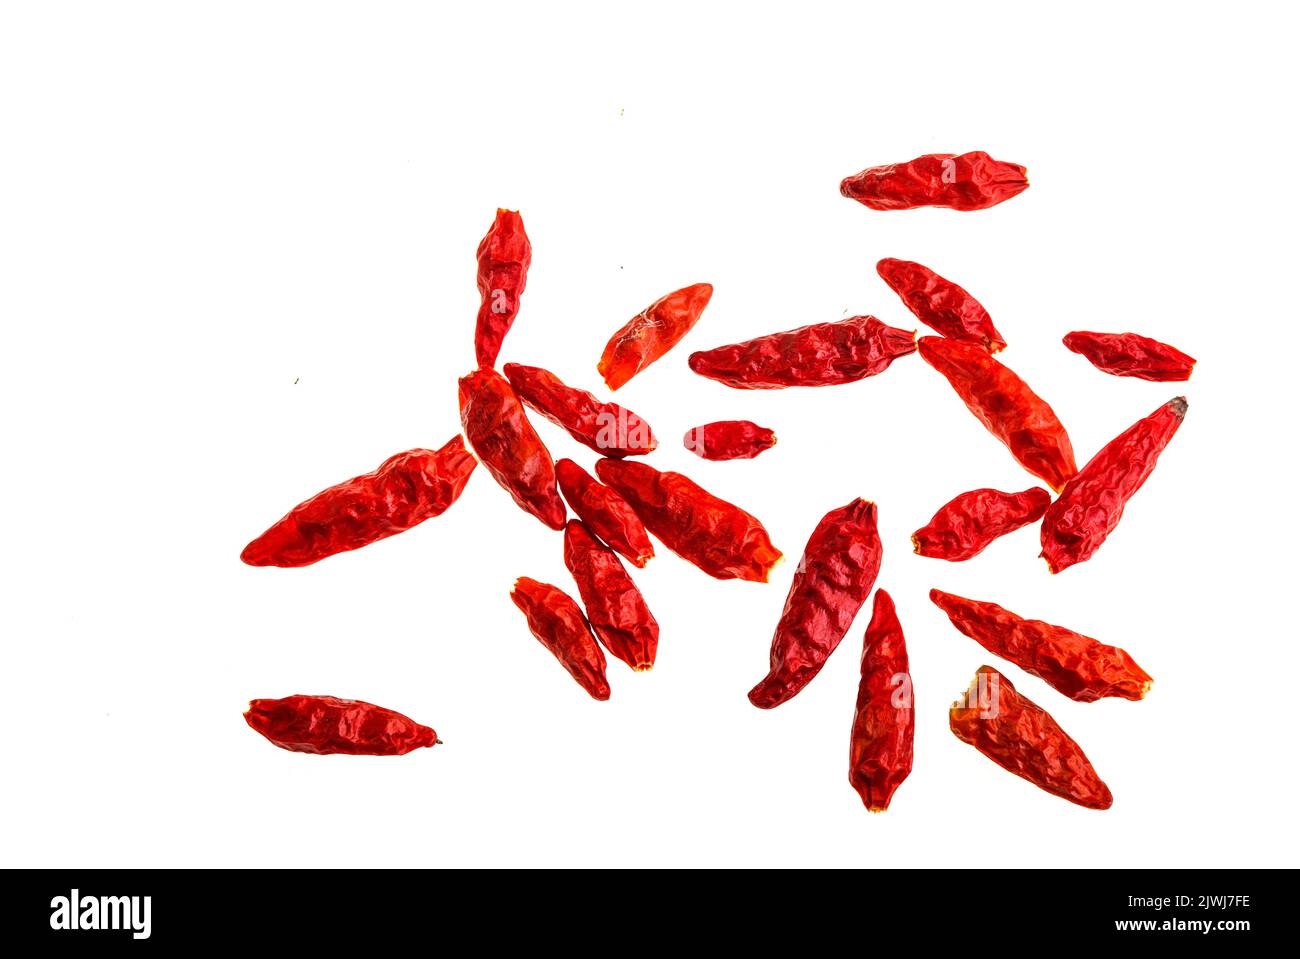 Sun dried homemade whole chilli peppers used in many cuisines as a spice to add heat to dishes Stock Photo